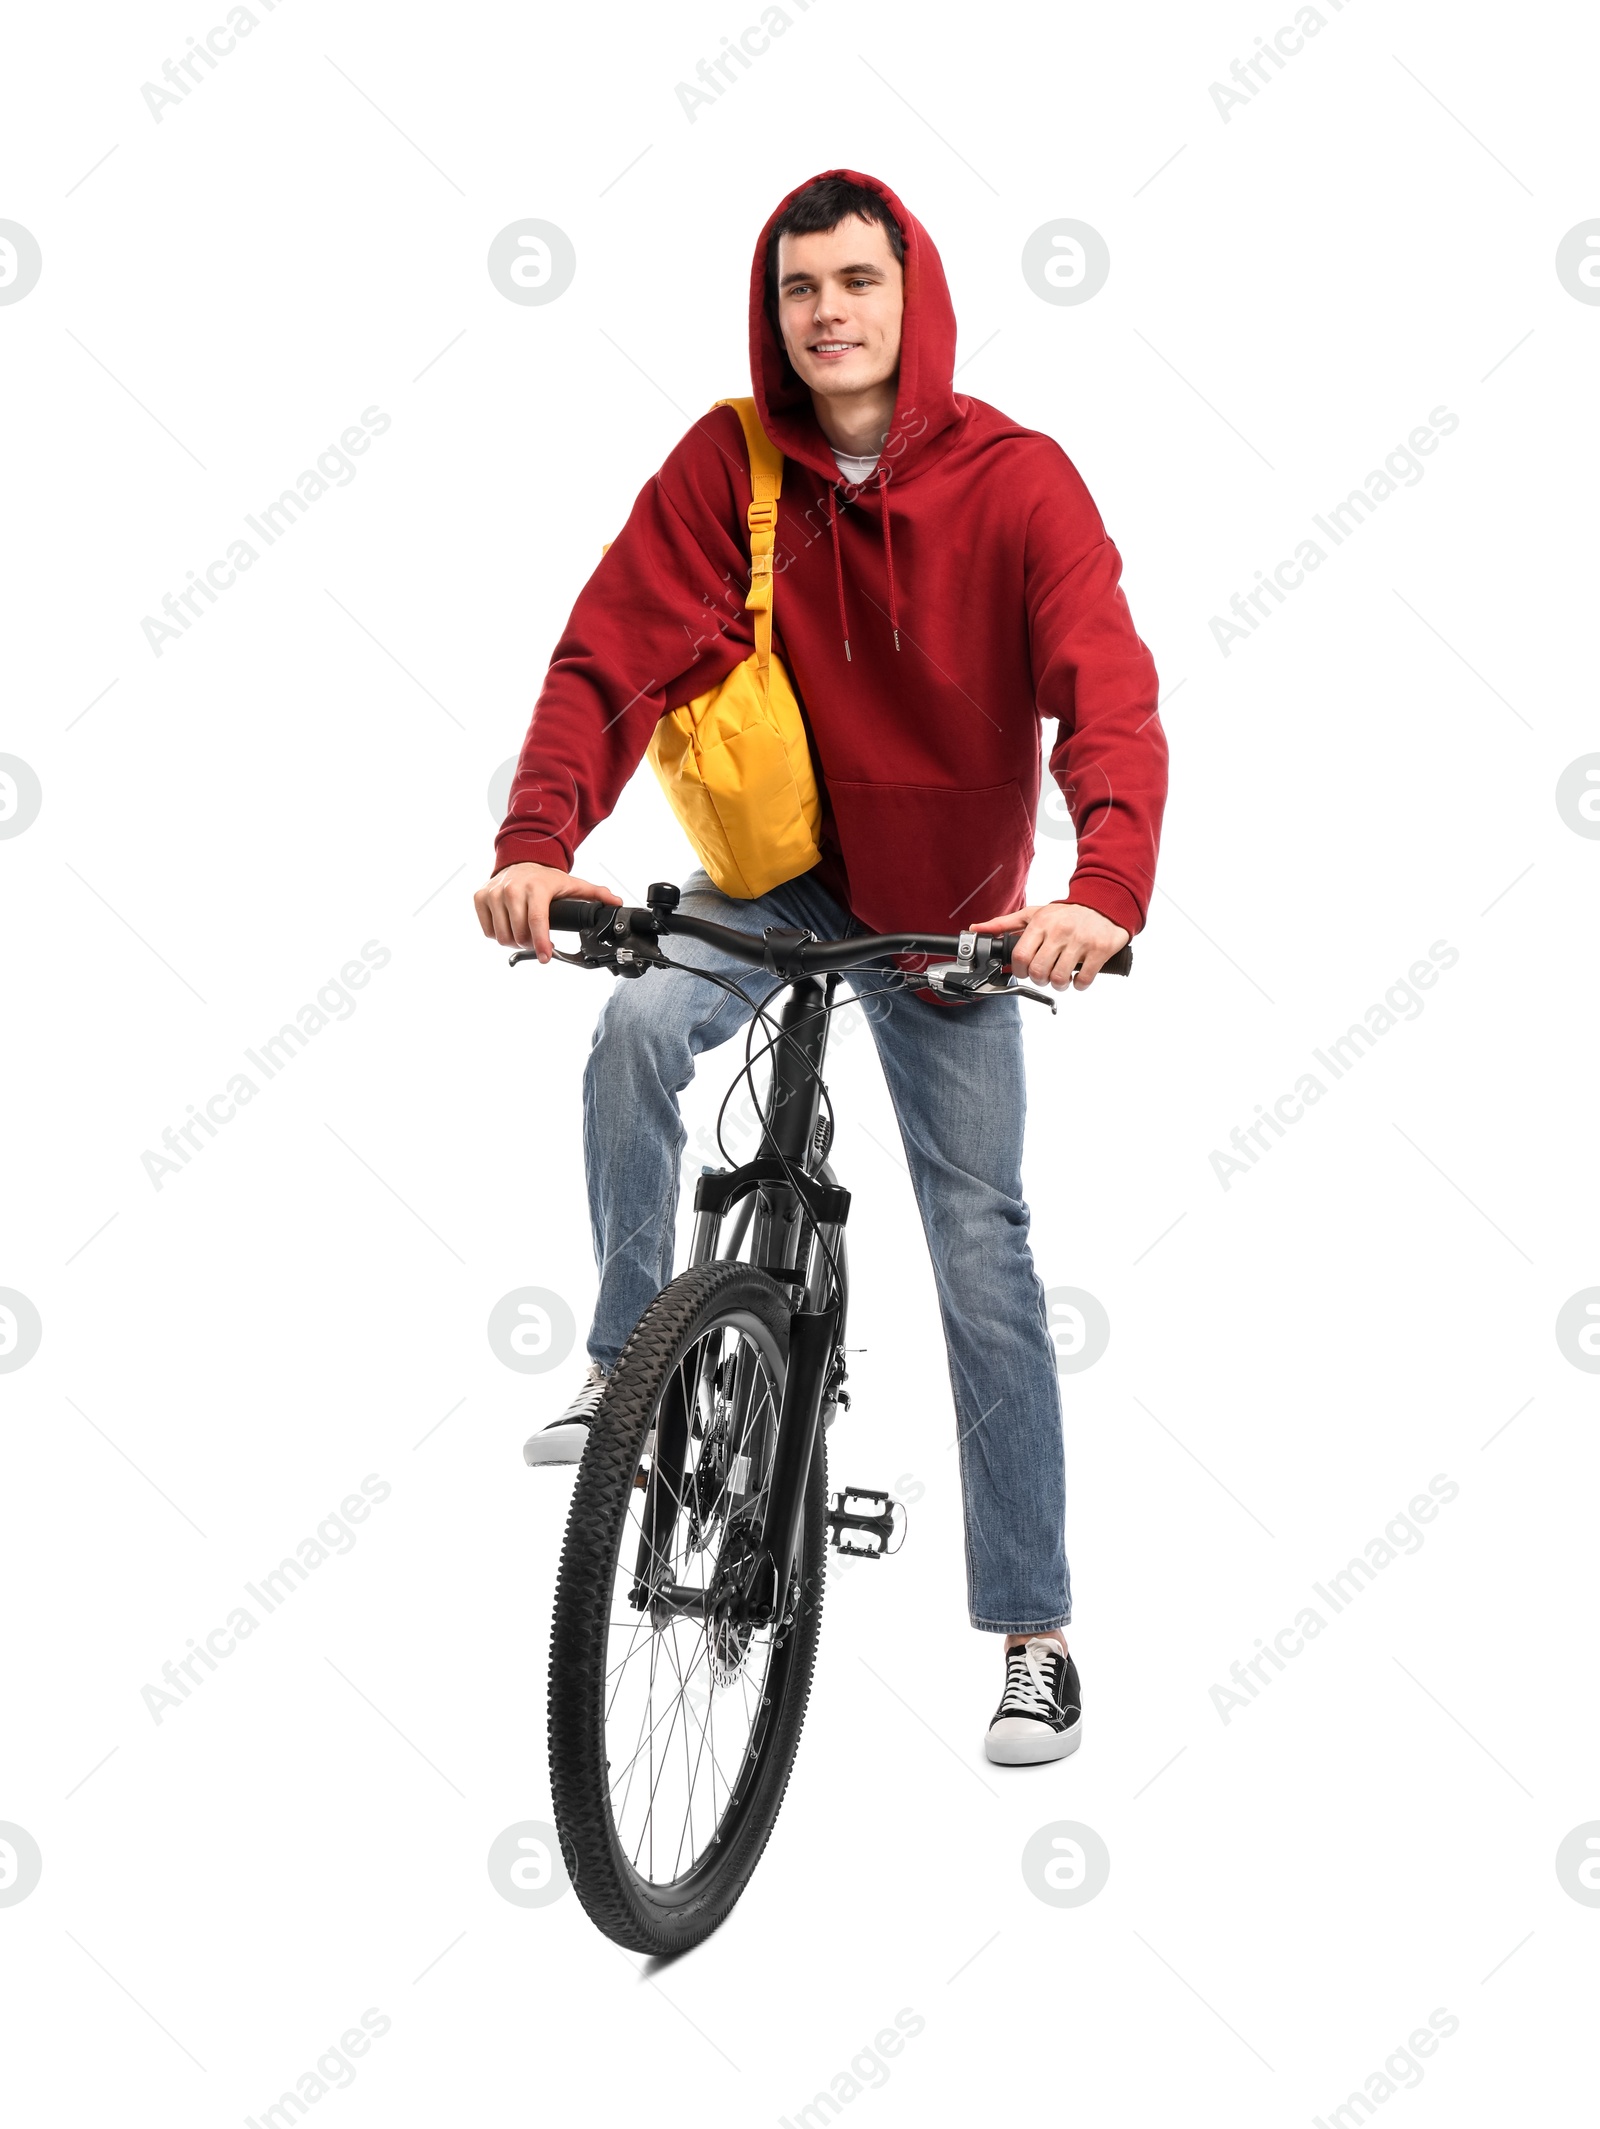 Photo of Smiling man with backpack riding bicycle on white background